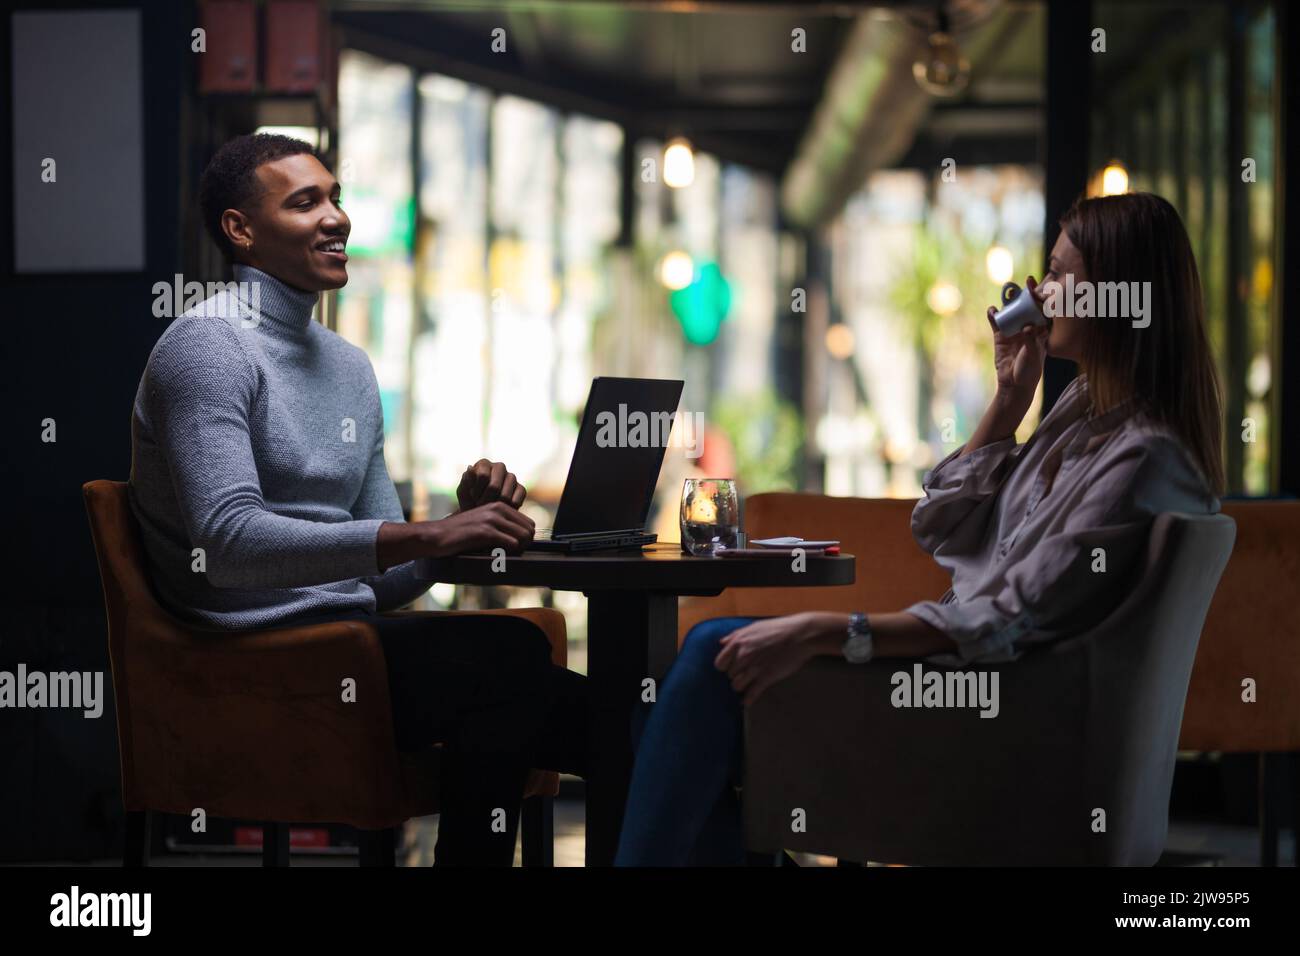 Friends at a cafe after work. Business colleagues working on laptop and drinking coffee in a restaurant. Stock Photo